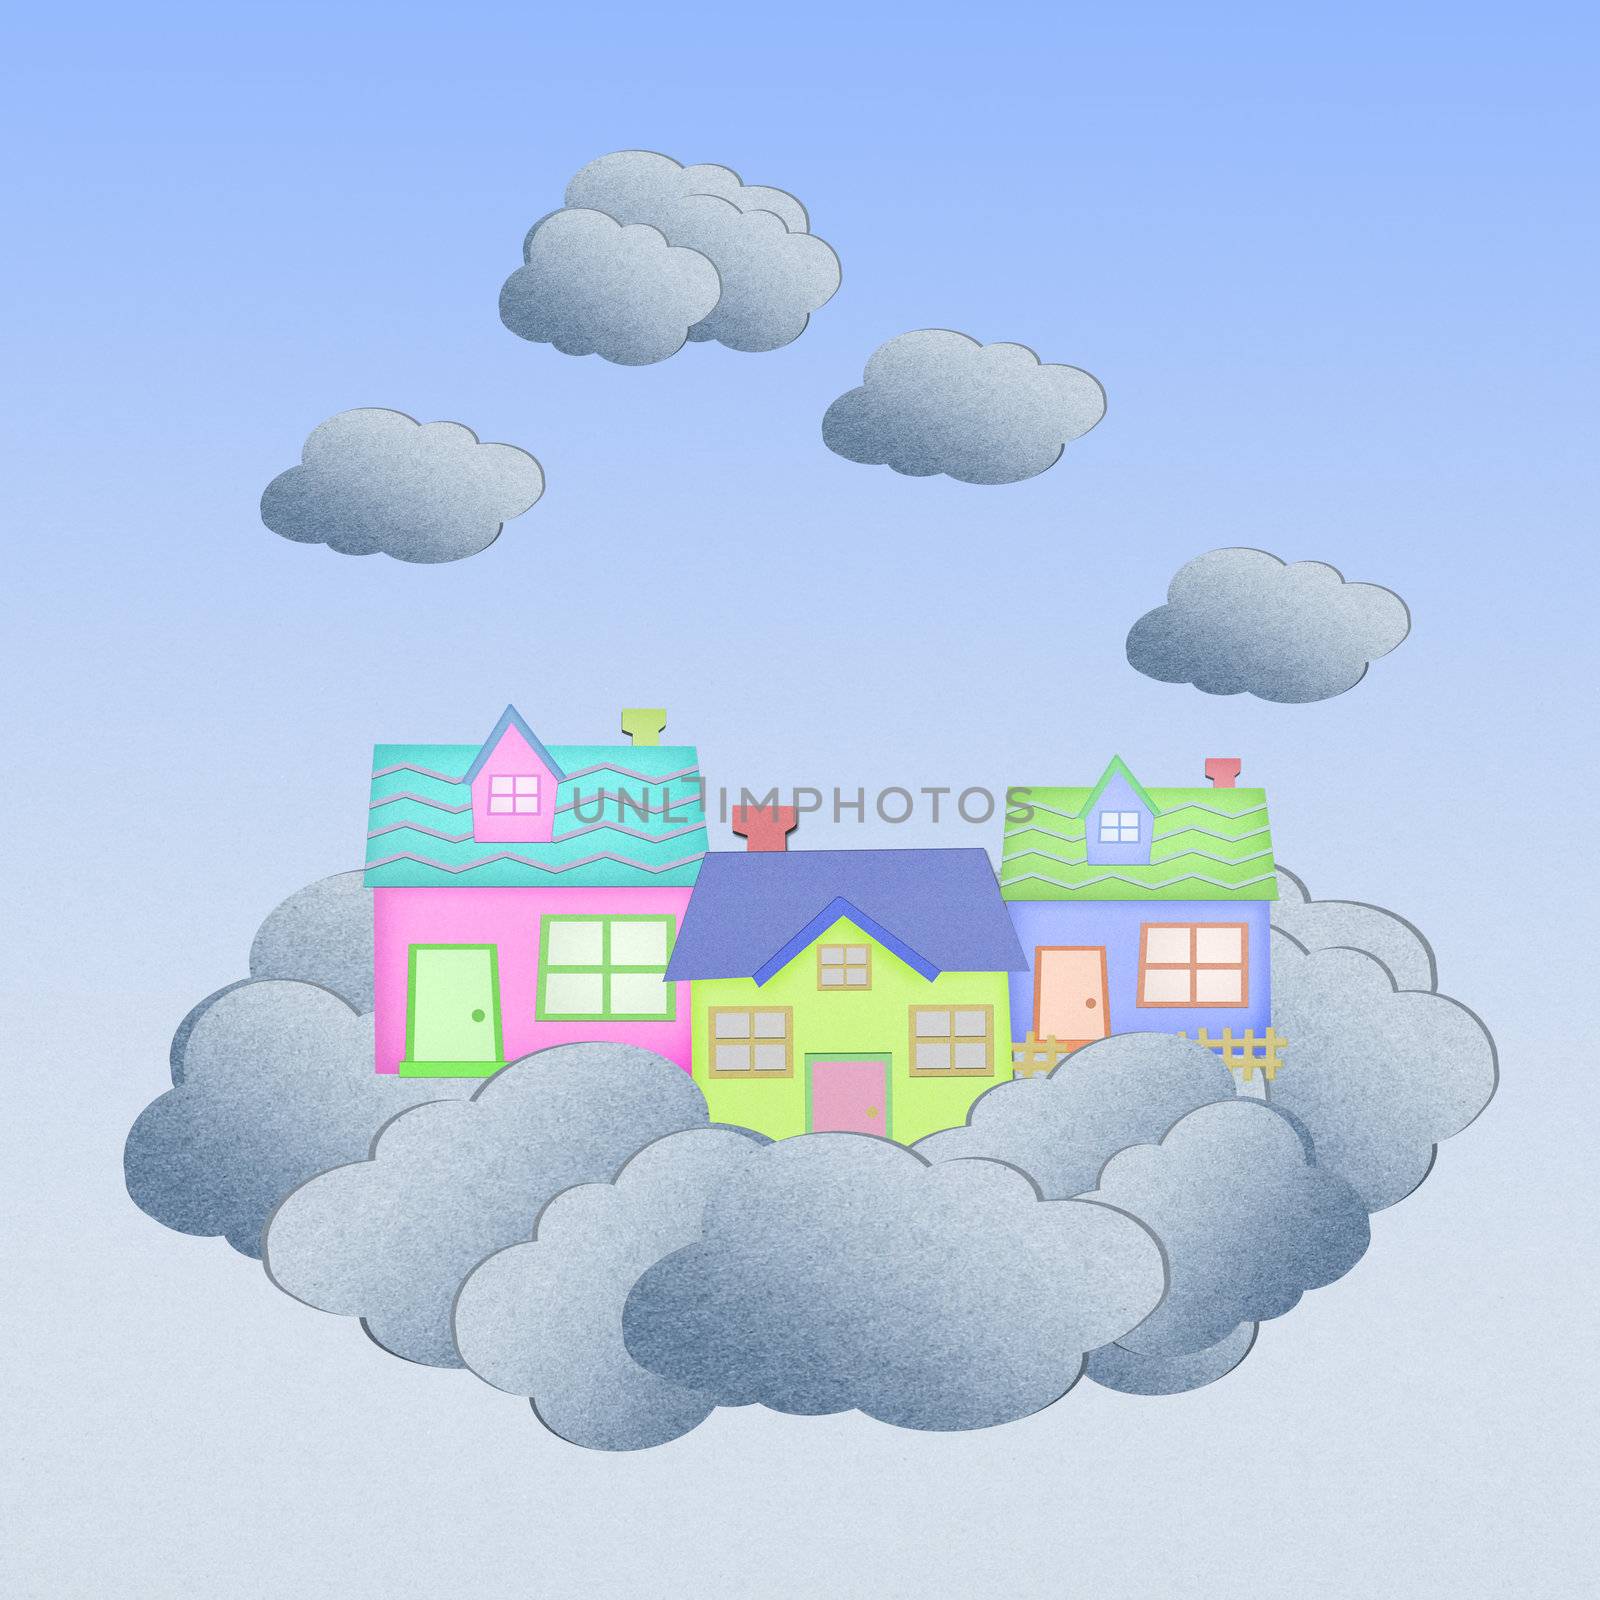 house from recycle paper on a cloud over the sky